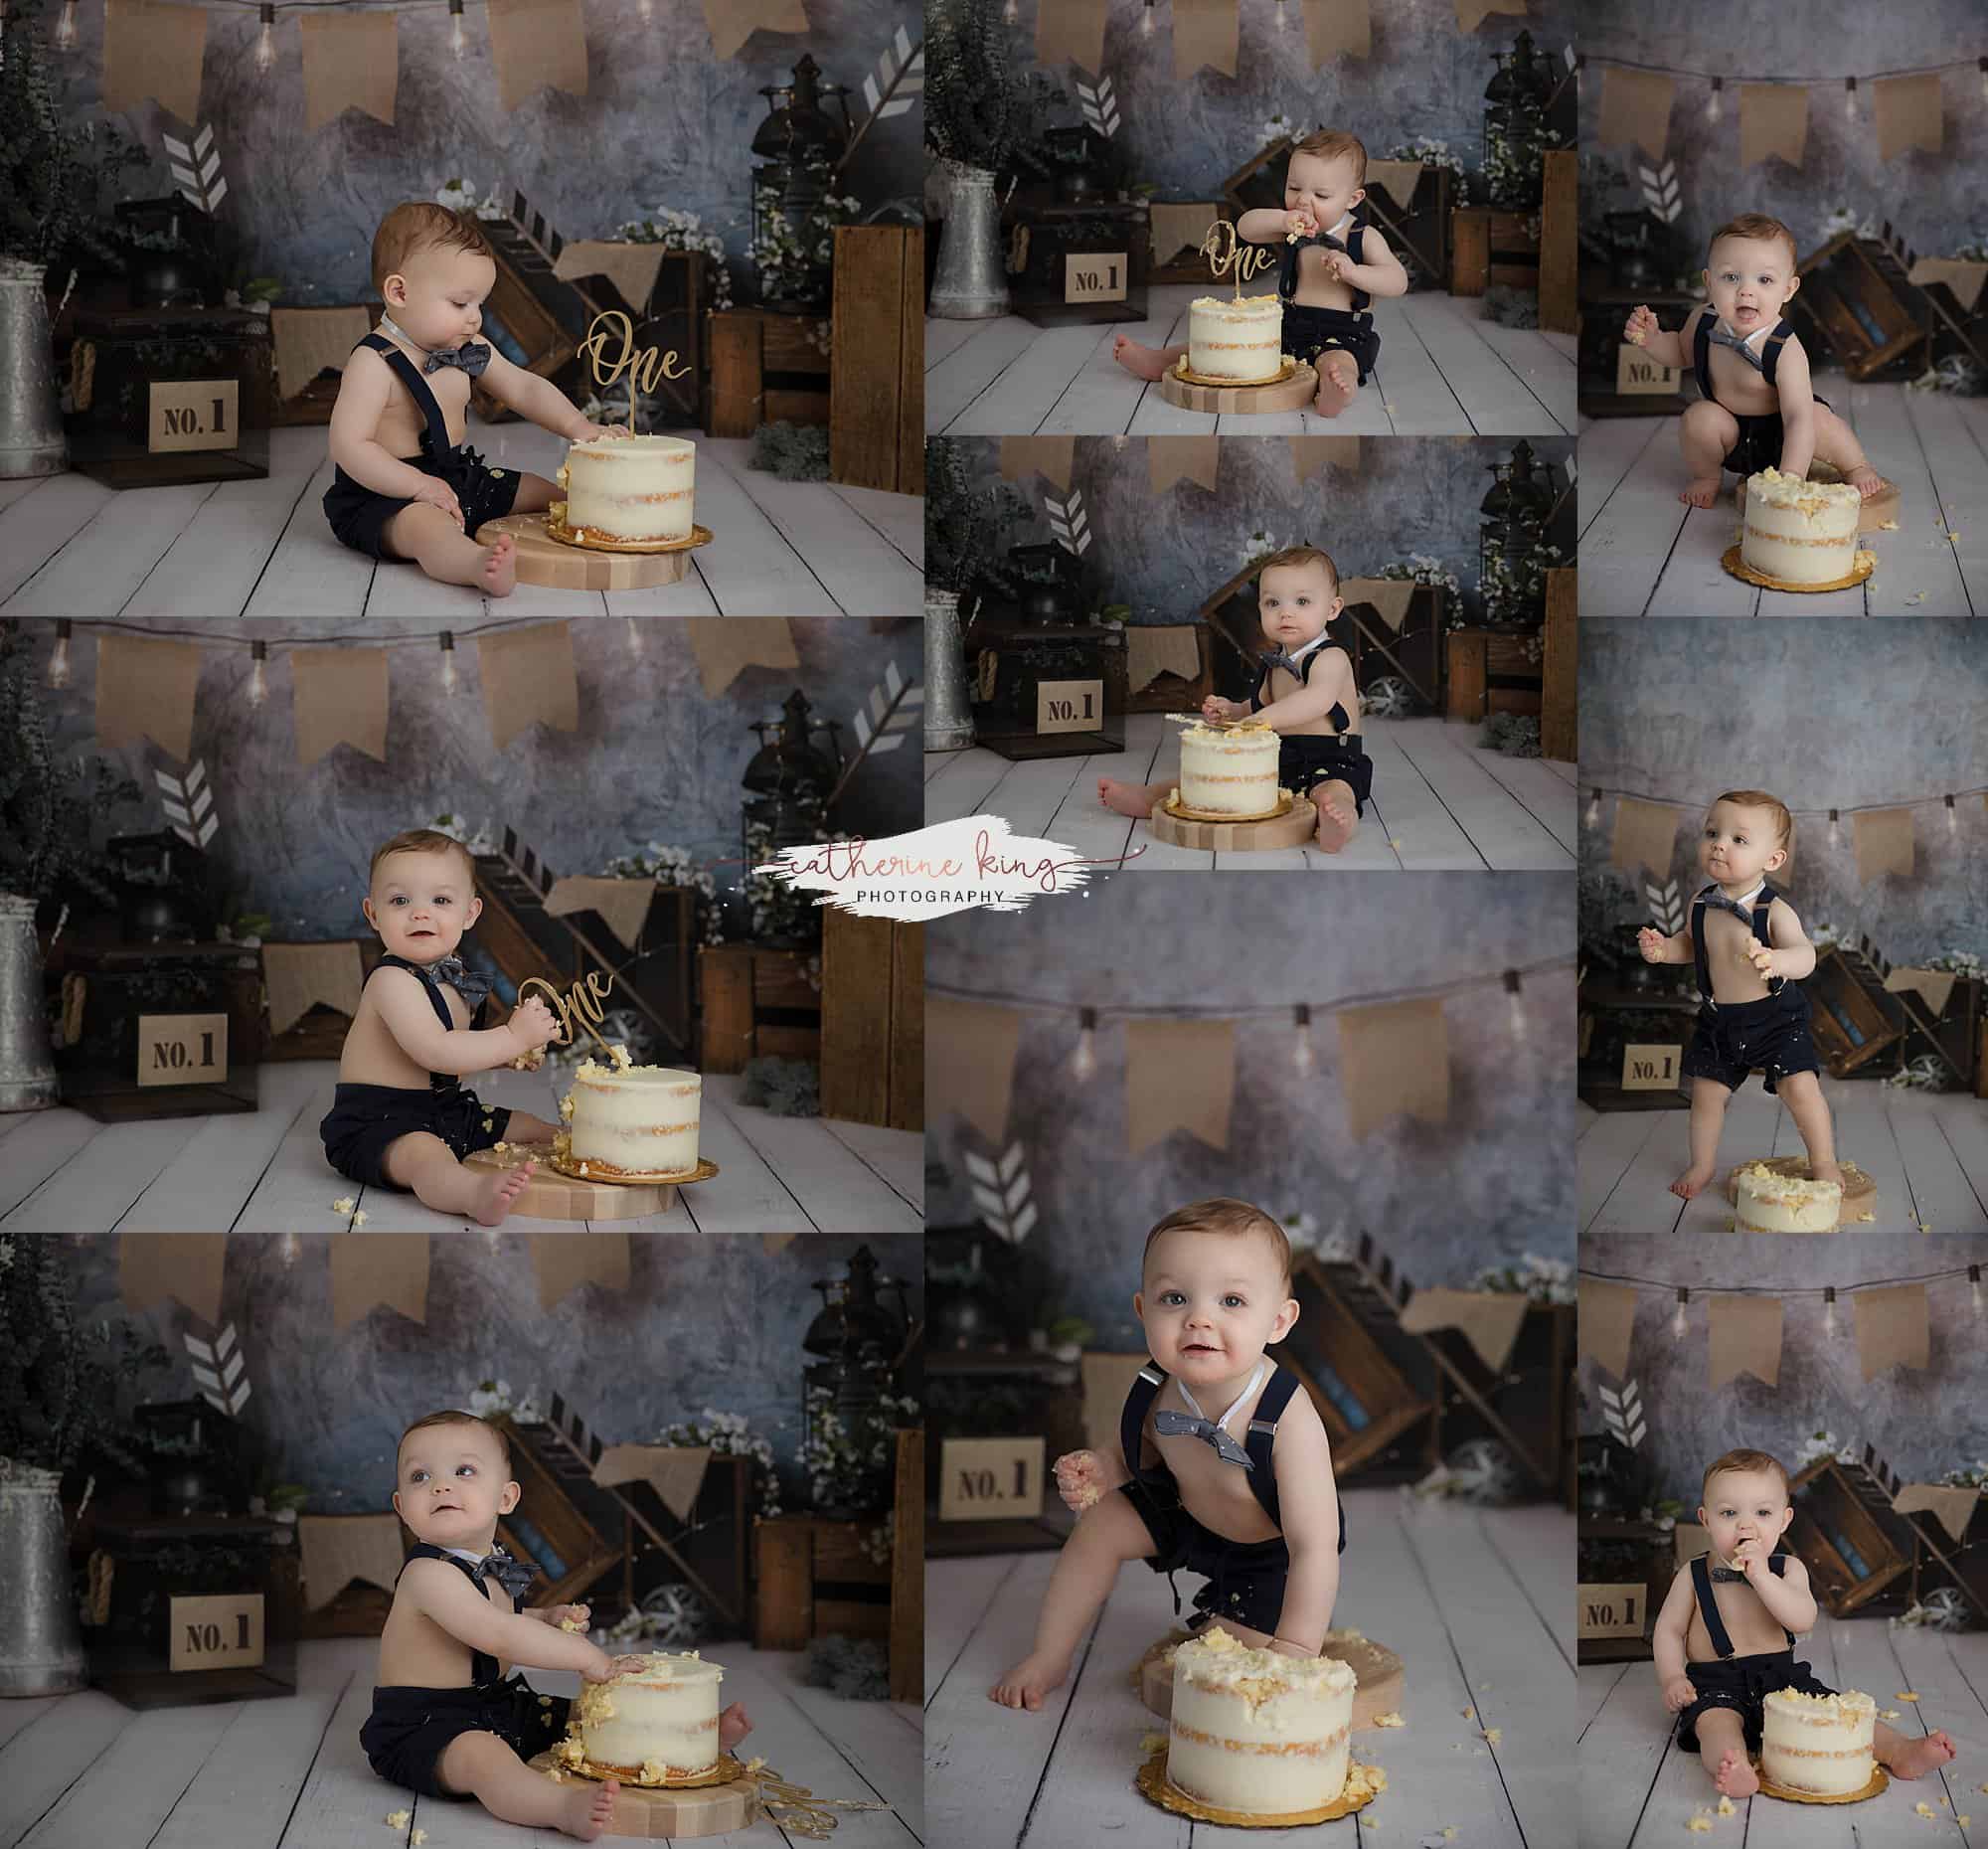 Connor's first birthdya celebration with cakesmash and family photos in Madison CT